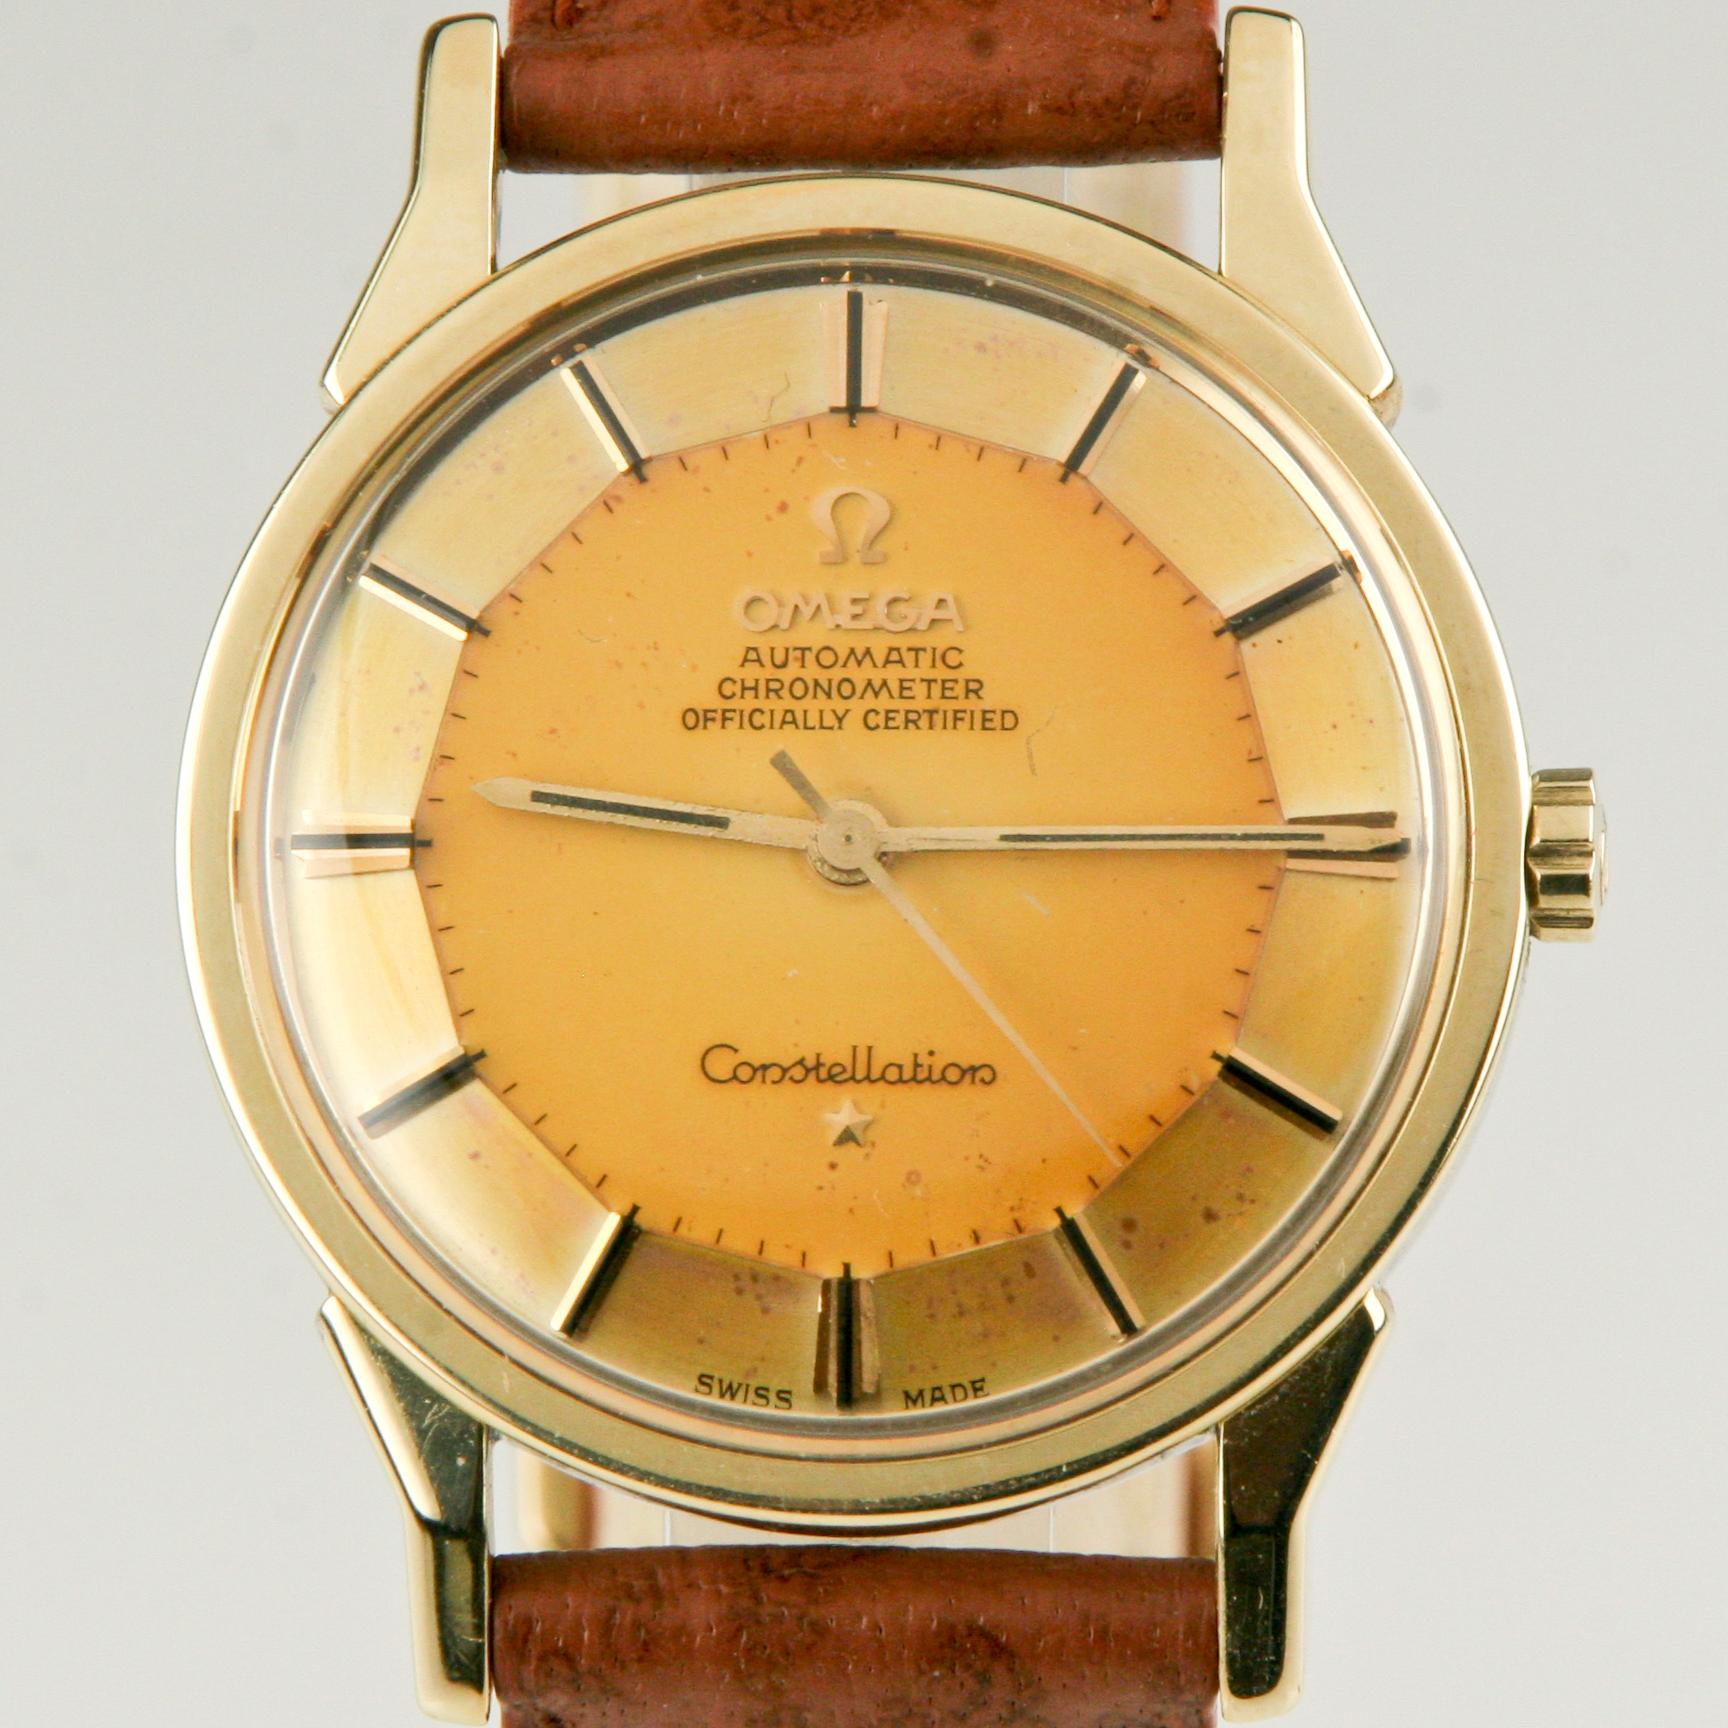 Movement #551.19623522
Case #167.005
Year: 1960s
Stainless Steel Case w/ Gold Cap Bezel/Lugs
35 mm in Diameter (37 mm w/ Crown)
Lug-to-Lug Distance = 45 mm
Lug-to-Lug Width = 18 mm
Thickness = 9 mm
Unique Pie-Pan Gold Dial w/ Orange-Rusty